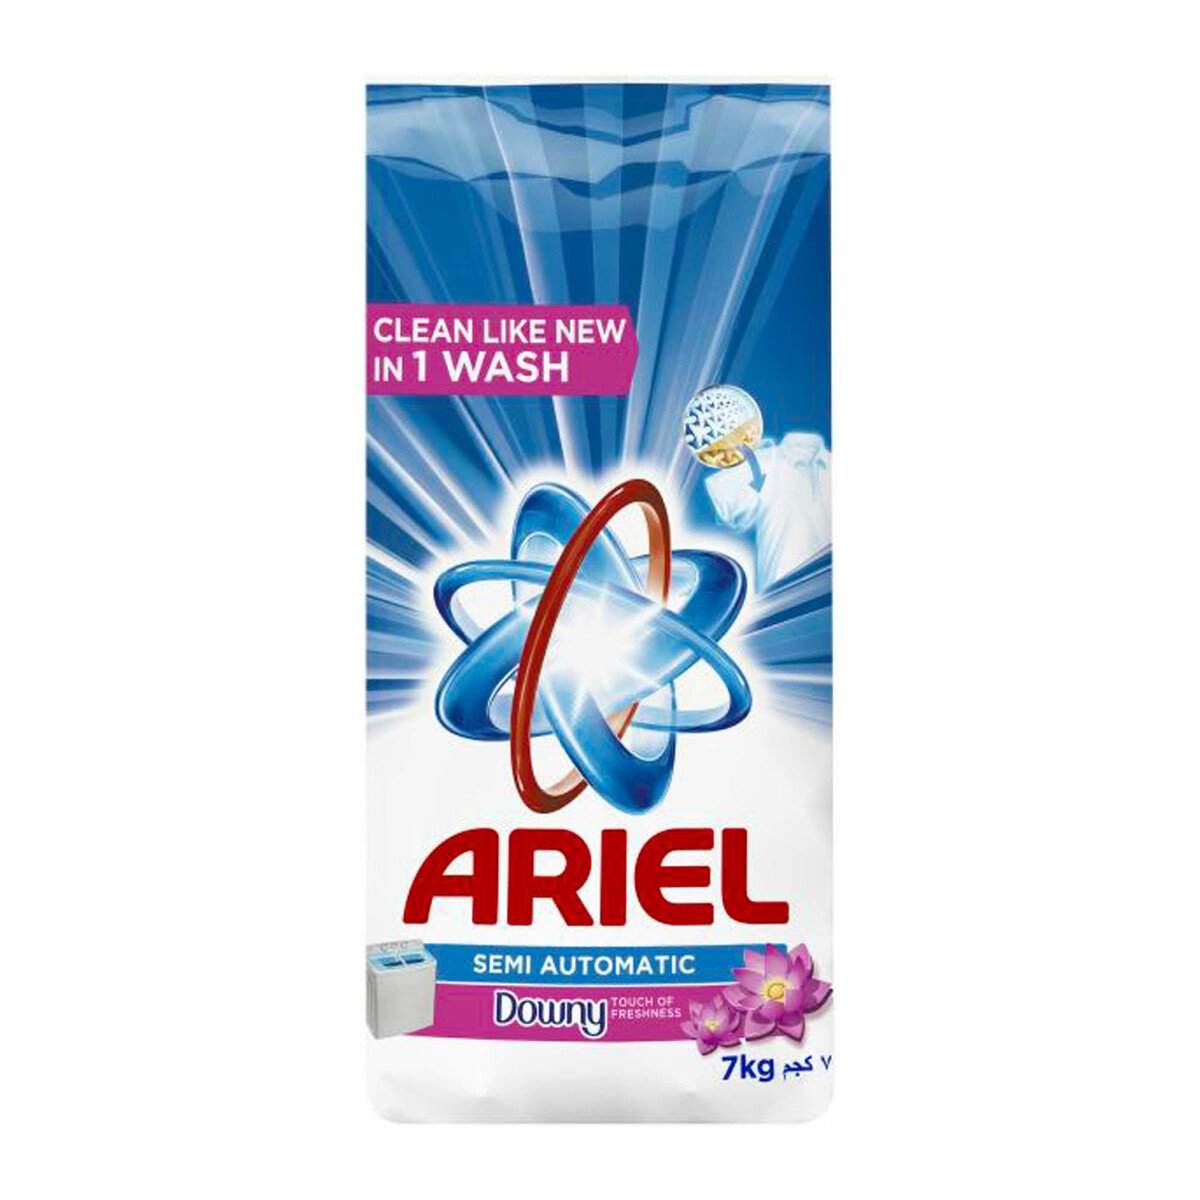 Ariel Semi Automatic Washing Powder With Touch of Downy 7kg